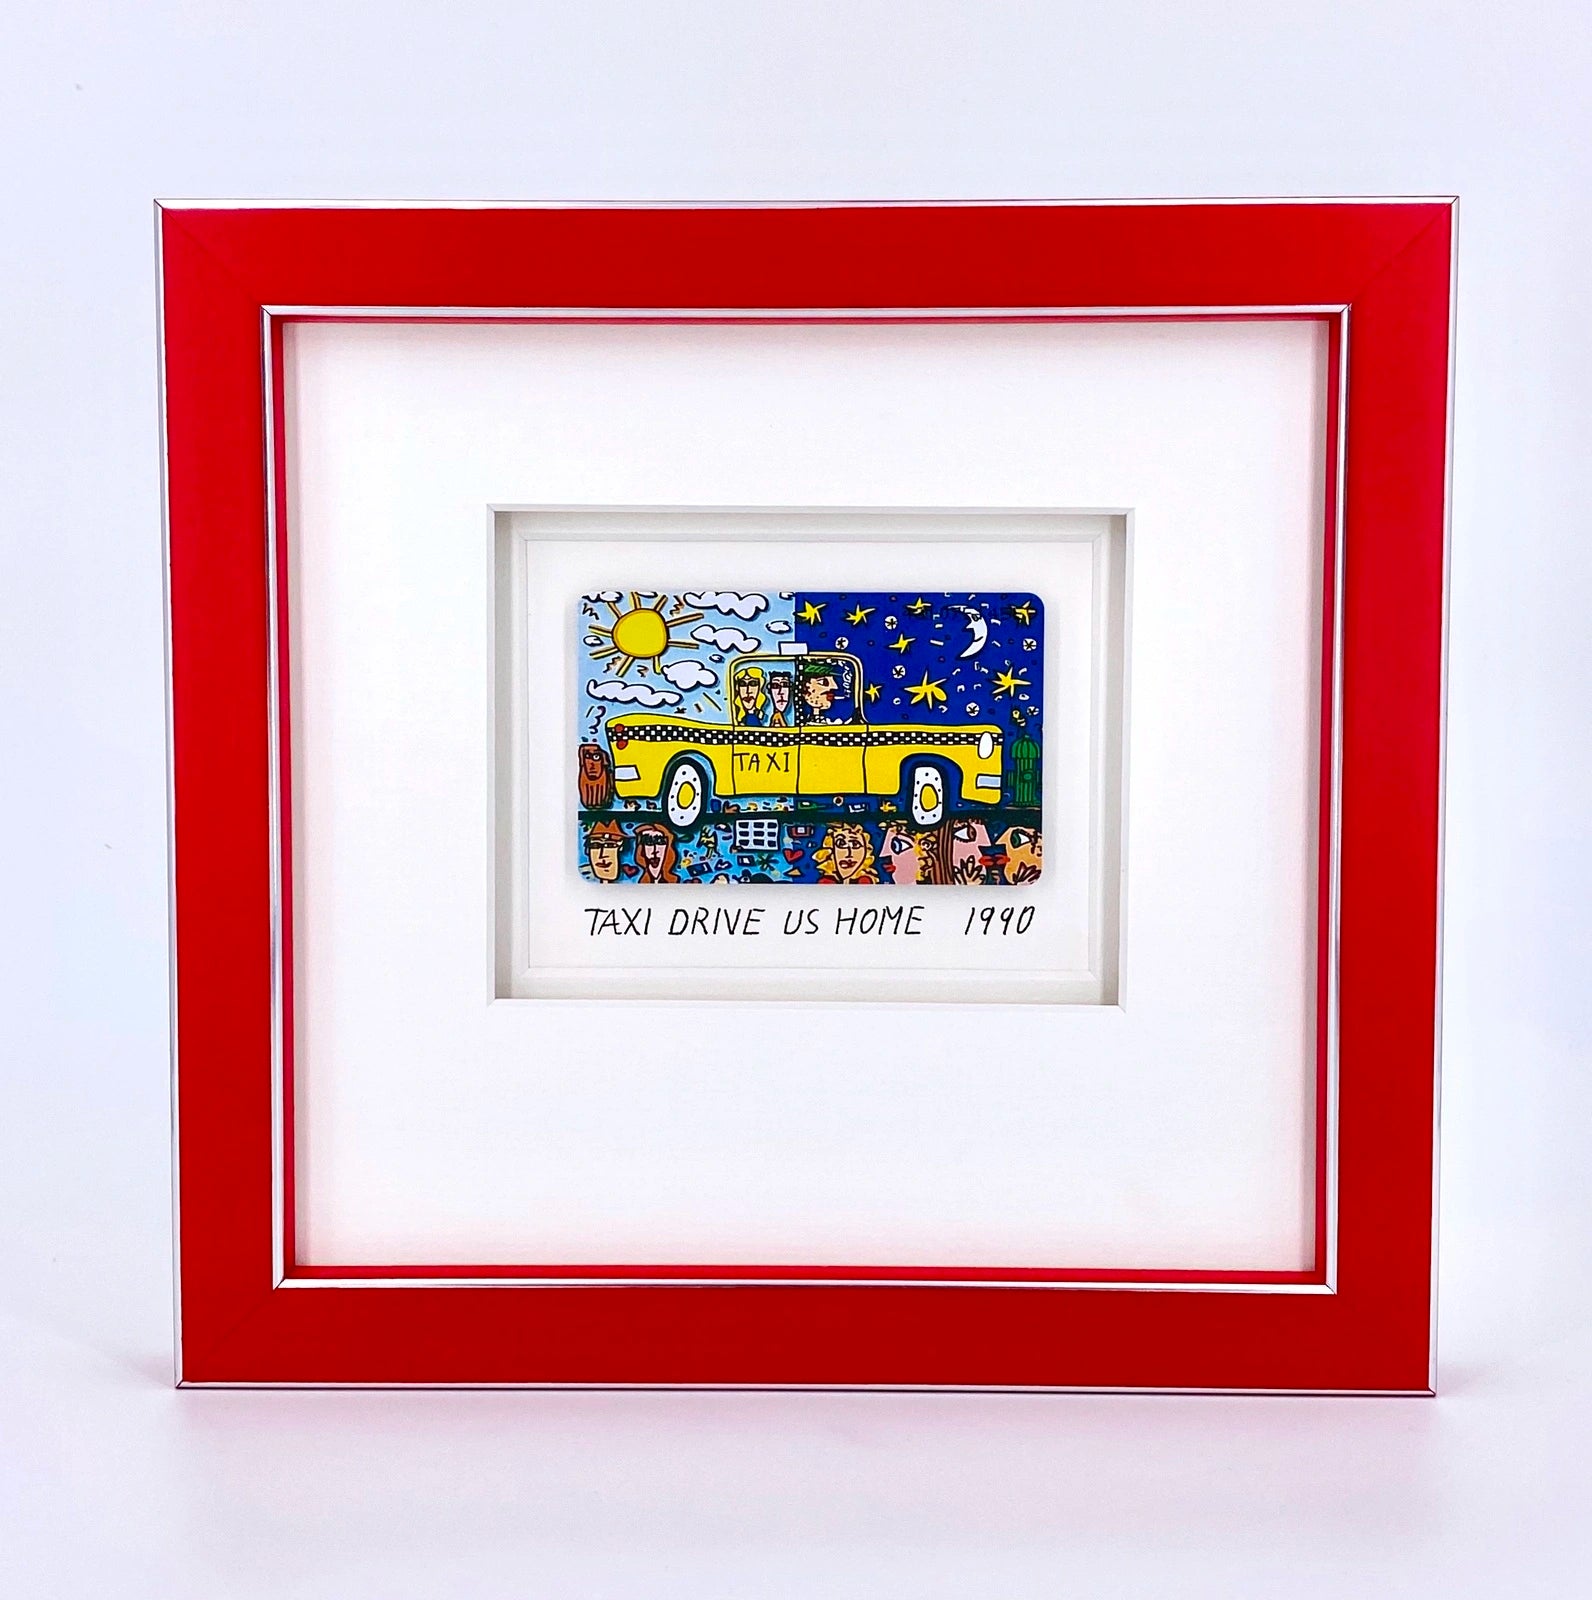 Original James Rizzi Taxi drive us home framed with museum glass